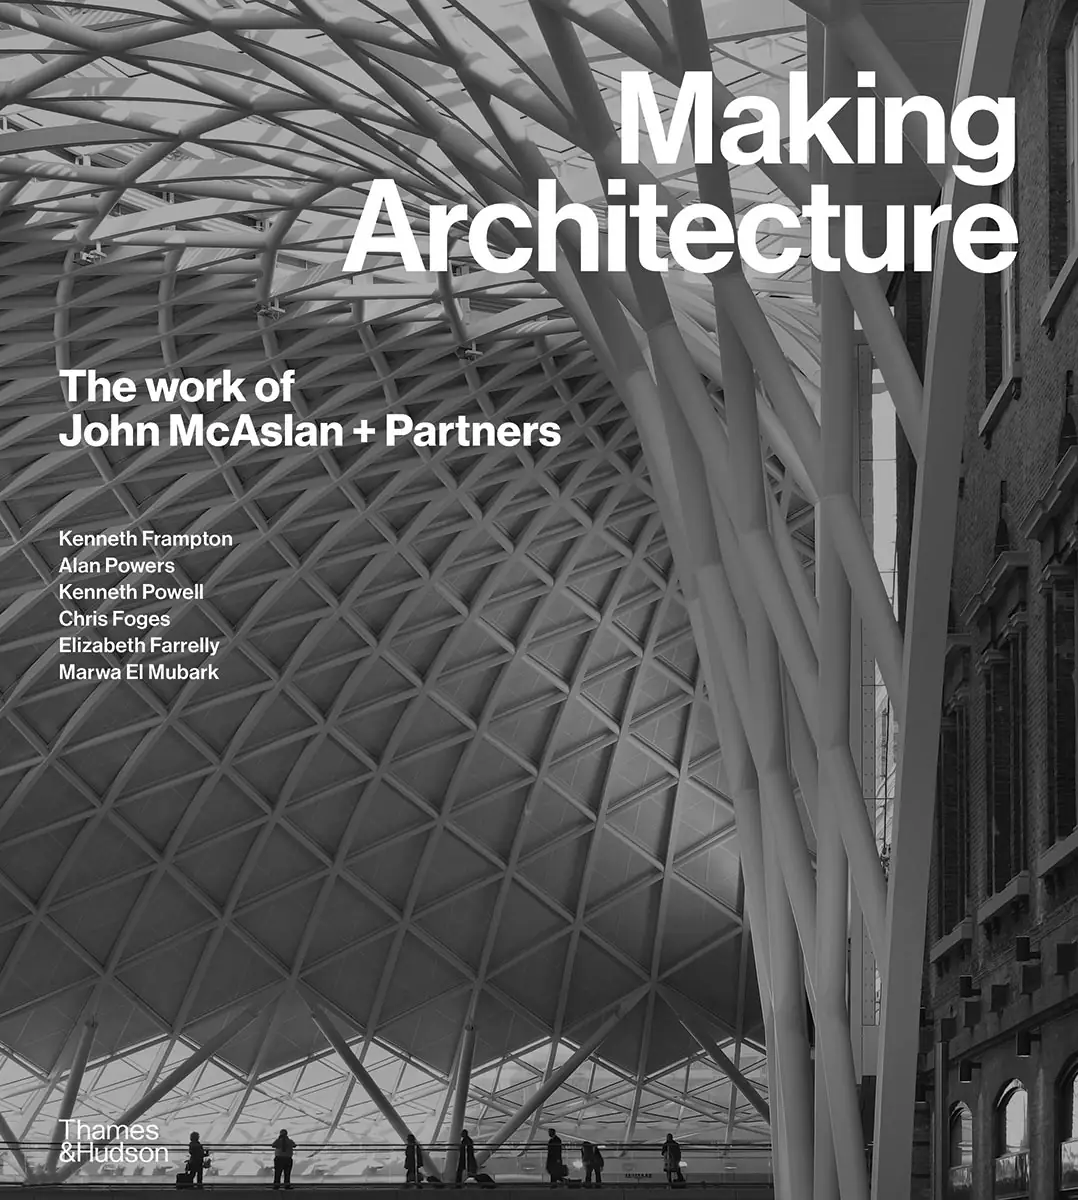 Making Architecture: The Work of John McAslan + Partners.